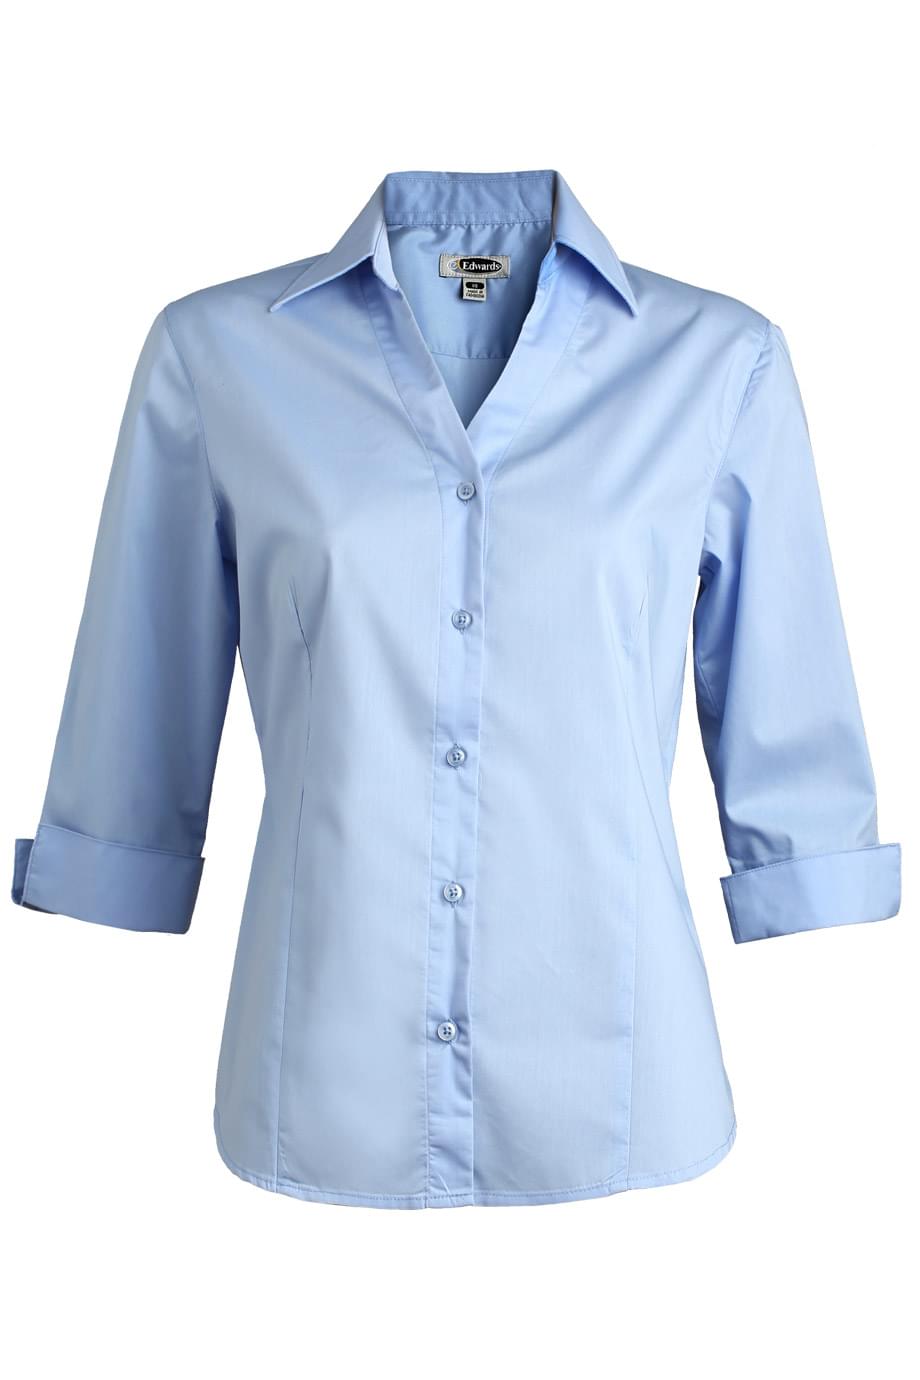 Men's Pinpoint Oxford Short-Sleeve Shirt with Button-Down Collar, Edwards  Garment